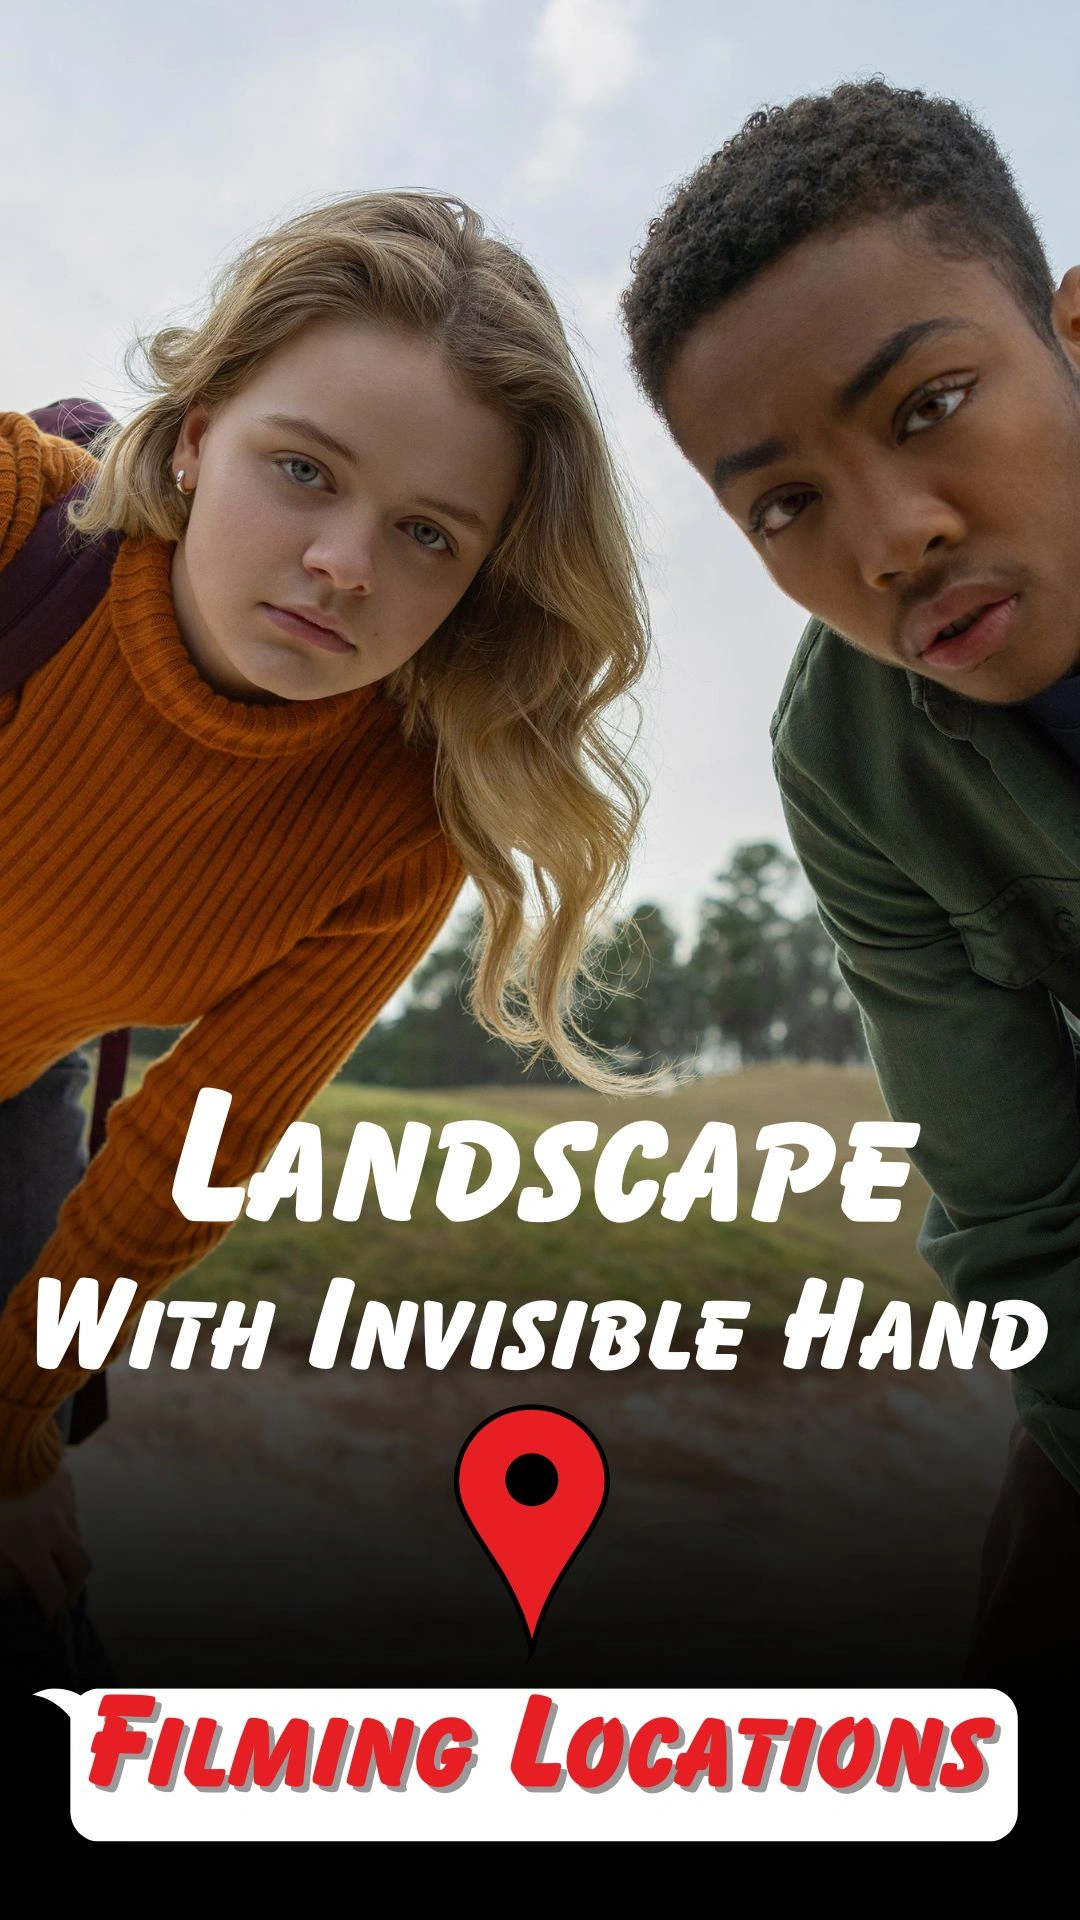 Landscape with Invisible Hand Filming Locations